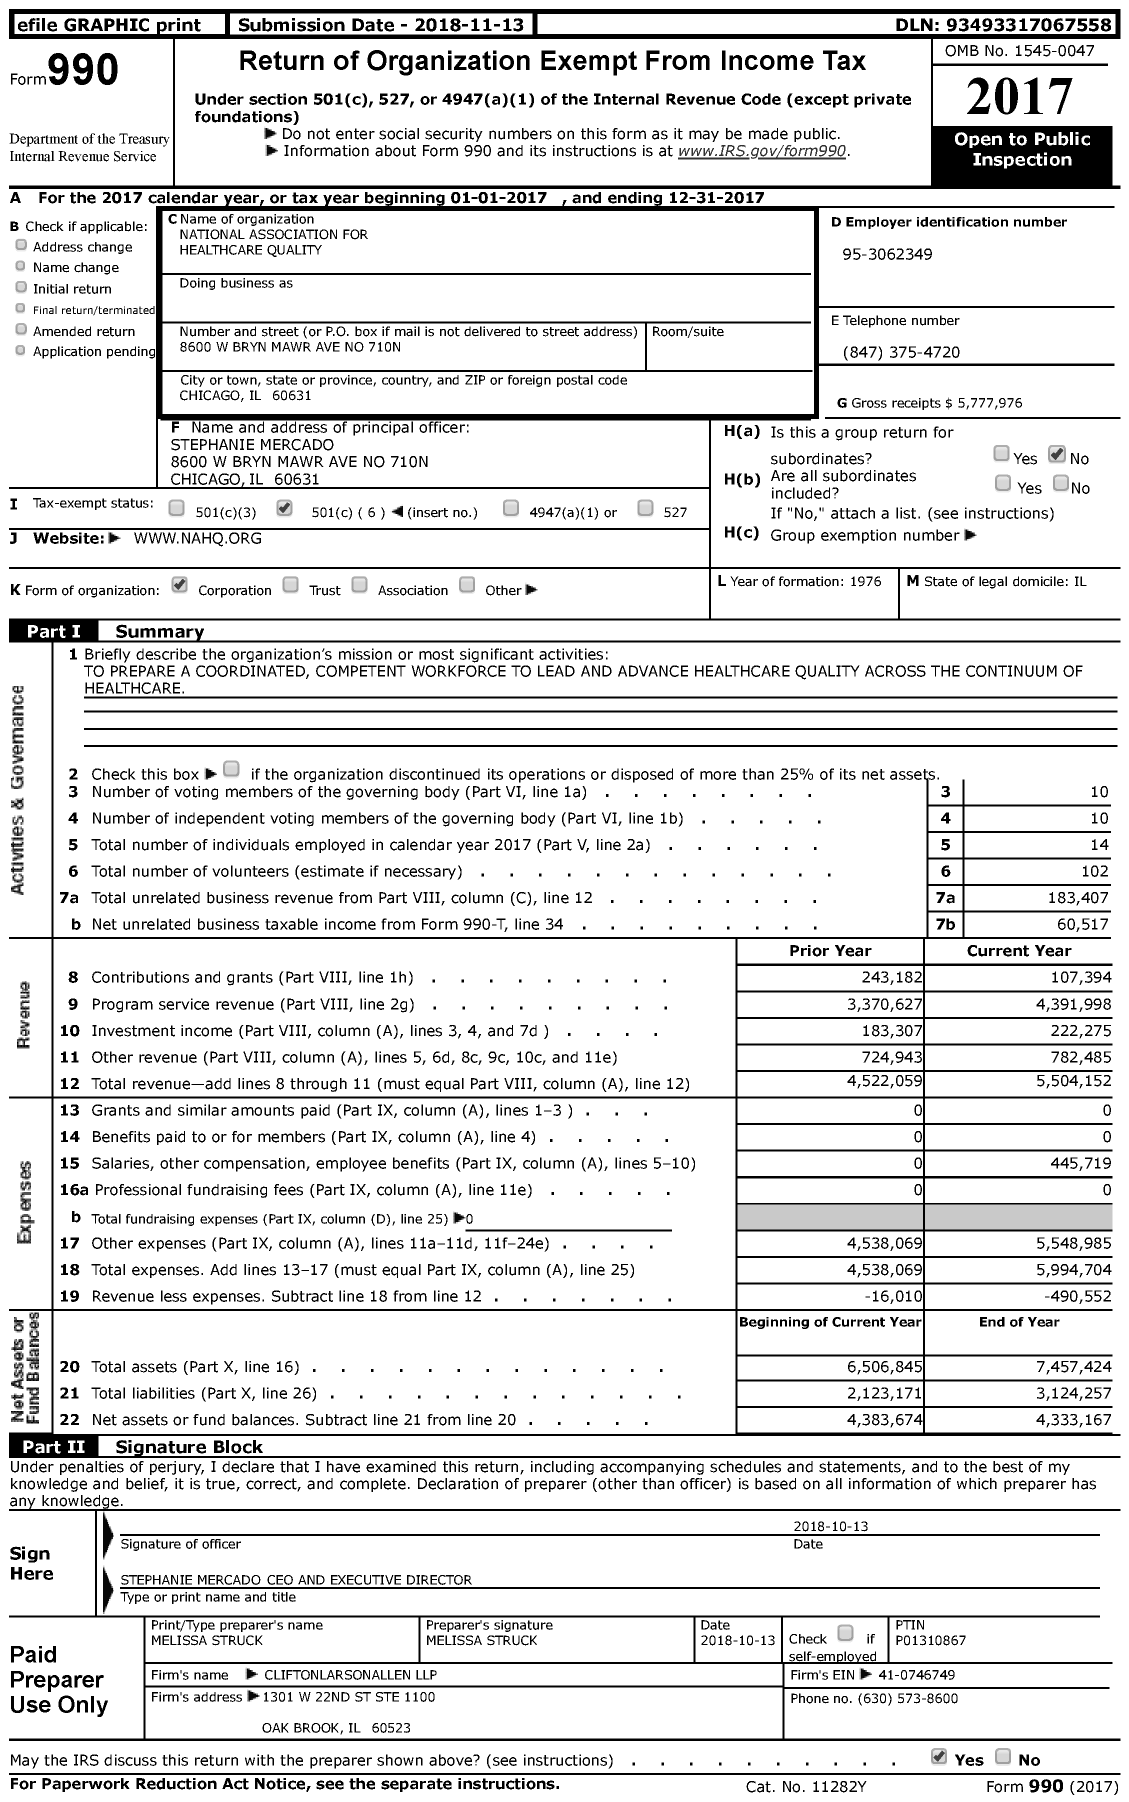 Image of first page of 2017 Form 990 for National Association for Healthcare Quality (NAHQ)